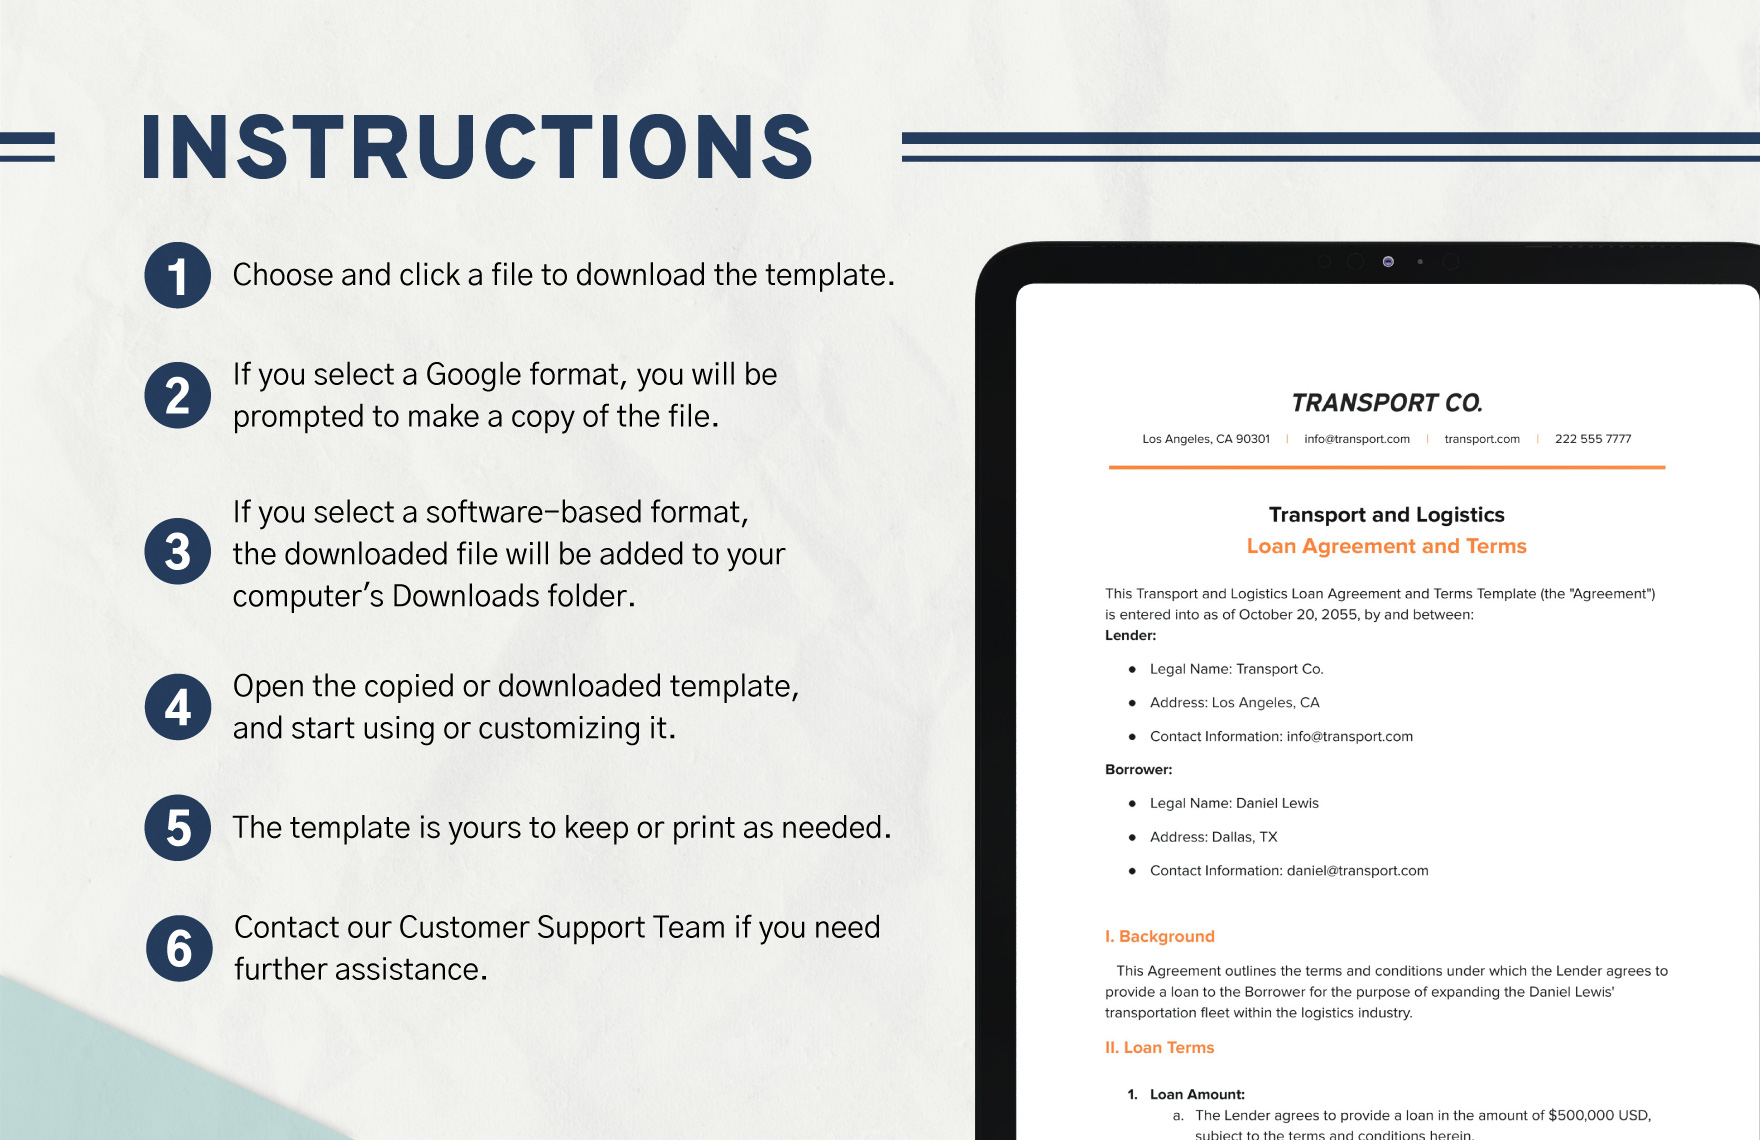 Transport and Logistics Loan Agreement and Terms Template